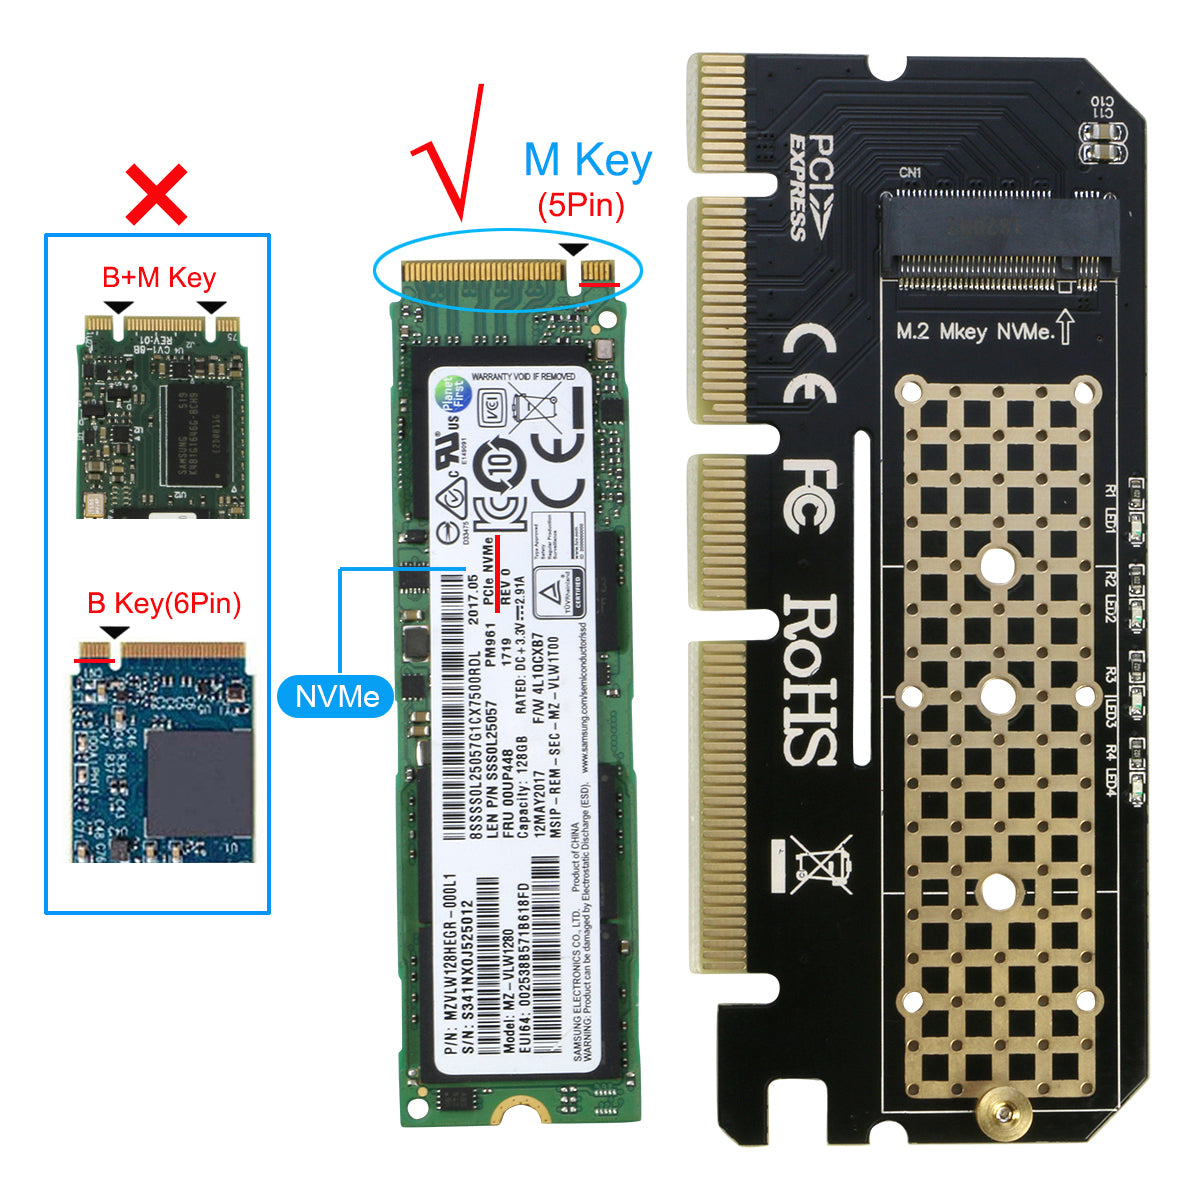 M.2 NVMe SSD to PCI-E 3.0 4x/8x/x16 Adapter Card Converter for Key P RIITOP